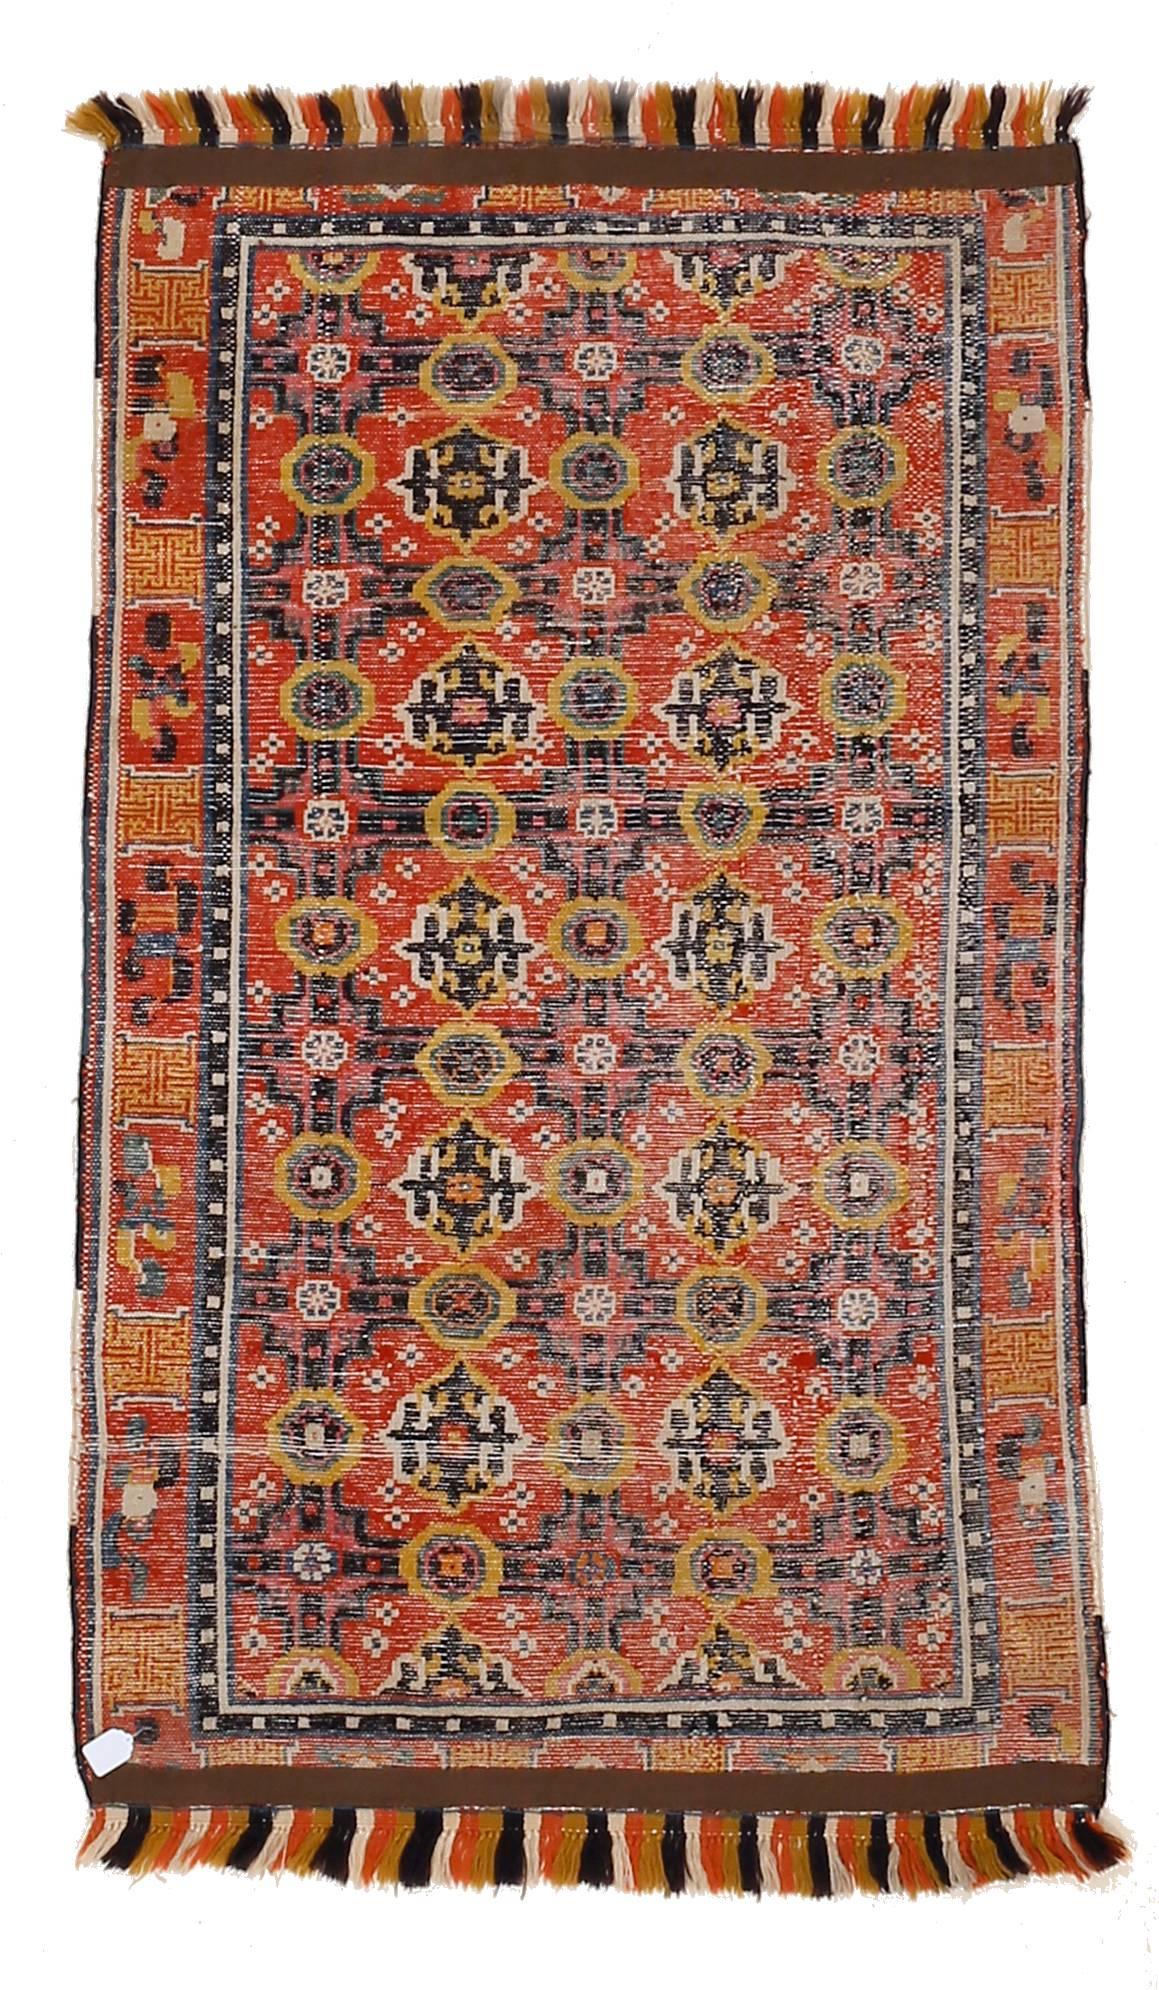 A rare and unusual red ground Chinese rug decorated by an infinite repeat pattern composed of a network of geometric devices derived from silk brocades of the Ming period. Examples of this type were most probably commissioned for monastic use, as